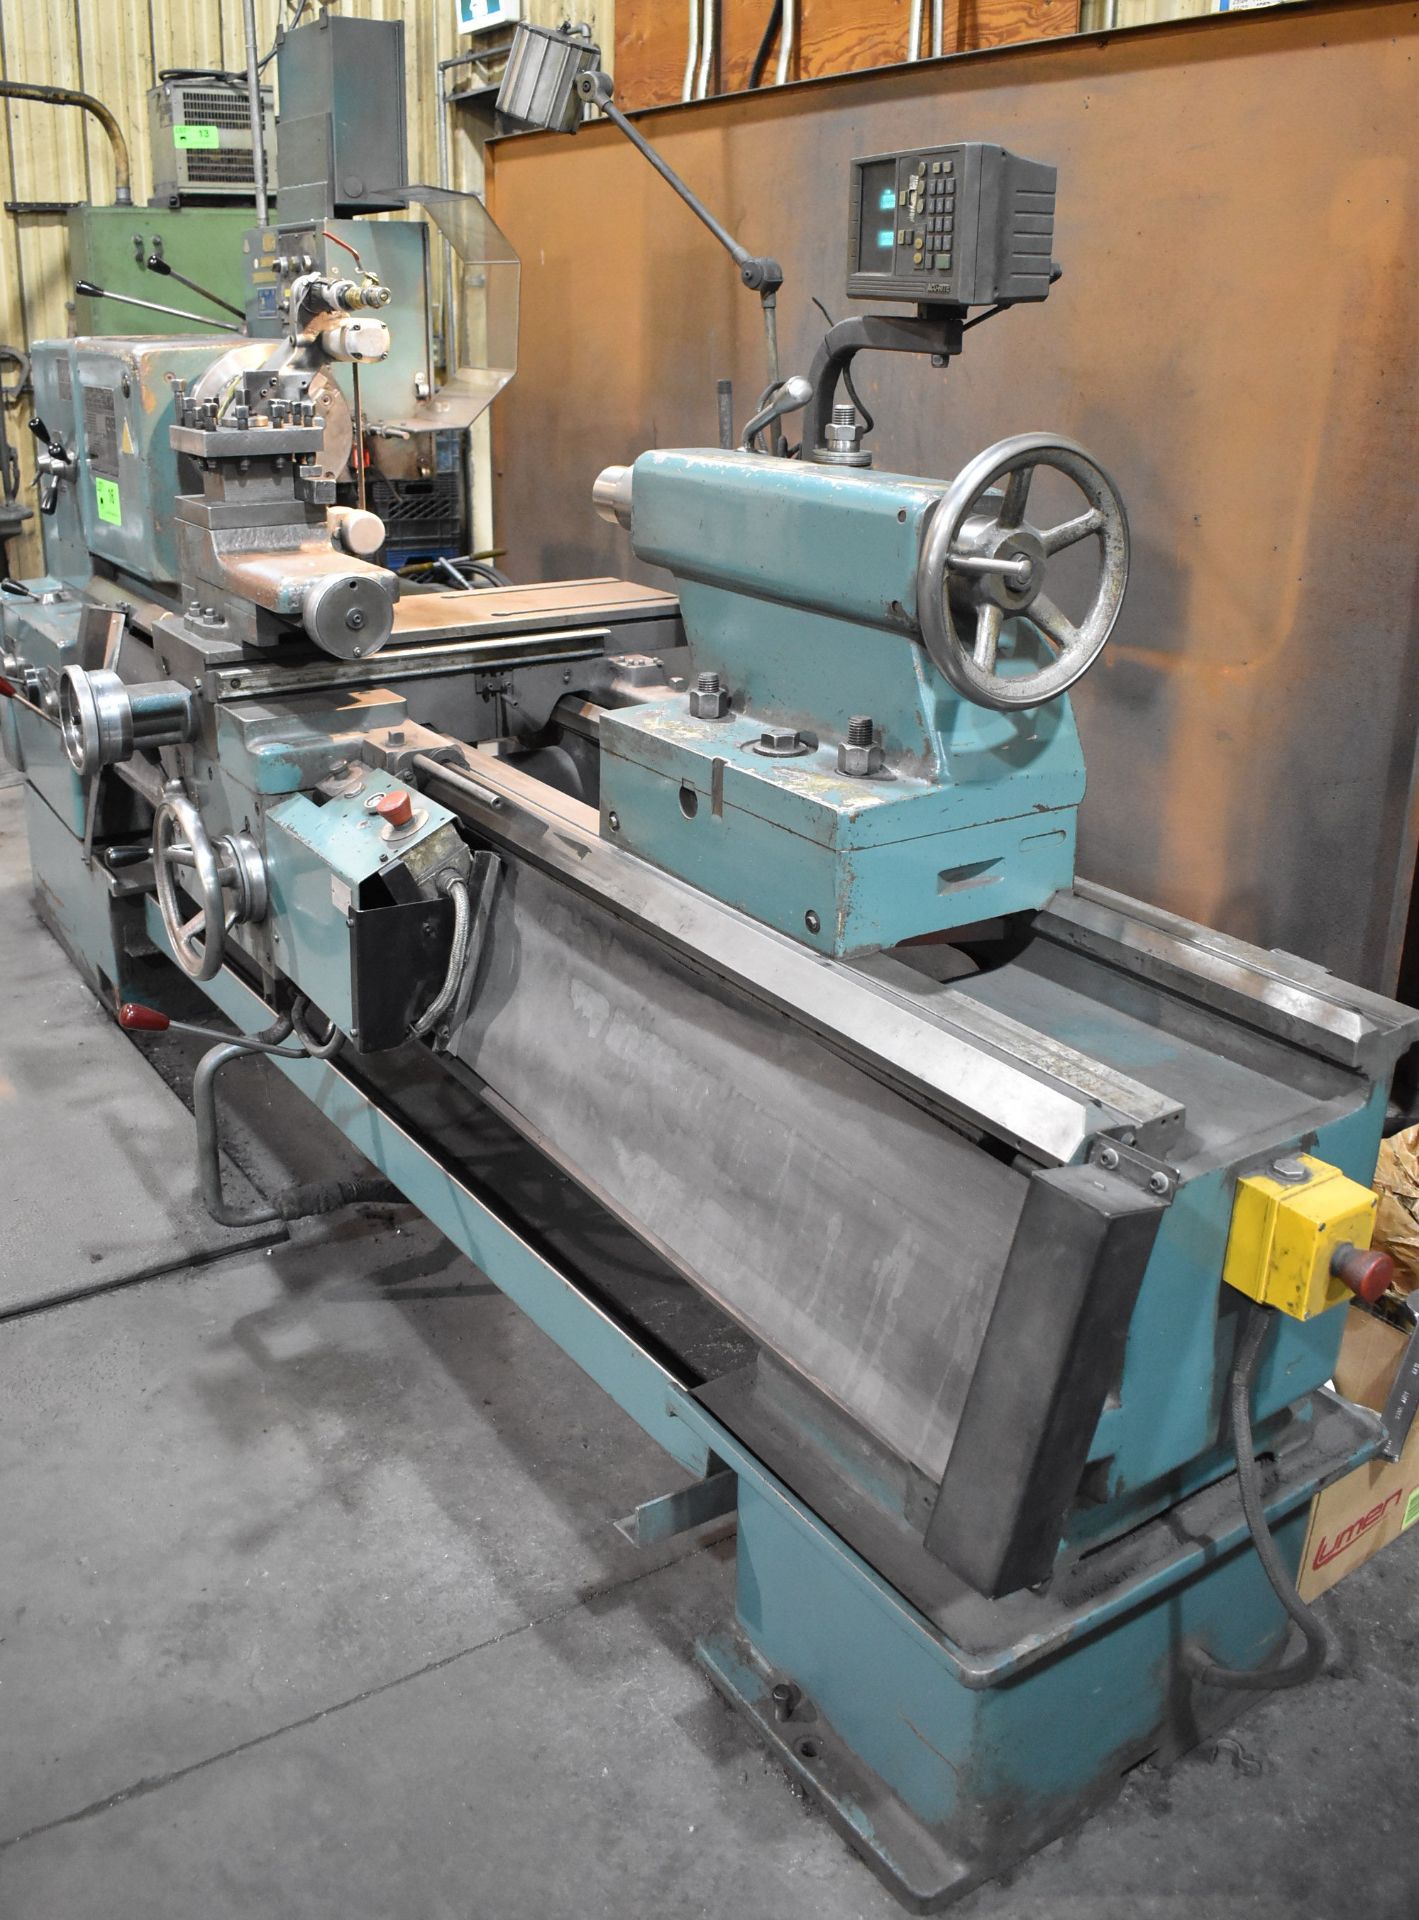 TOS SN 71 C GAP BED ENGINE LATHE WITH 26" SWING, 65" BETWEEN CENTERS, 3" SPINDLE BORE, SPEEDS TO - Image 5 of 14